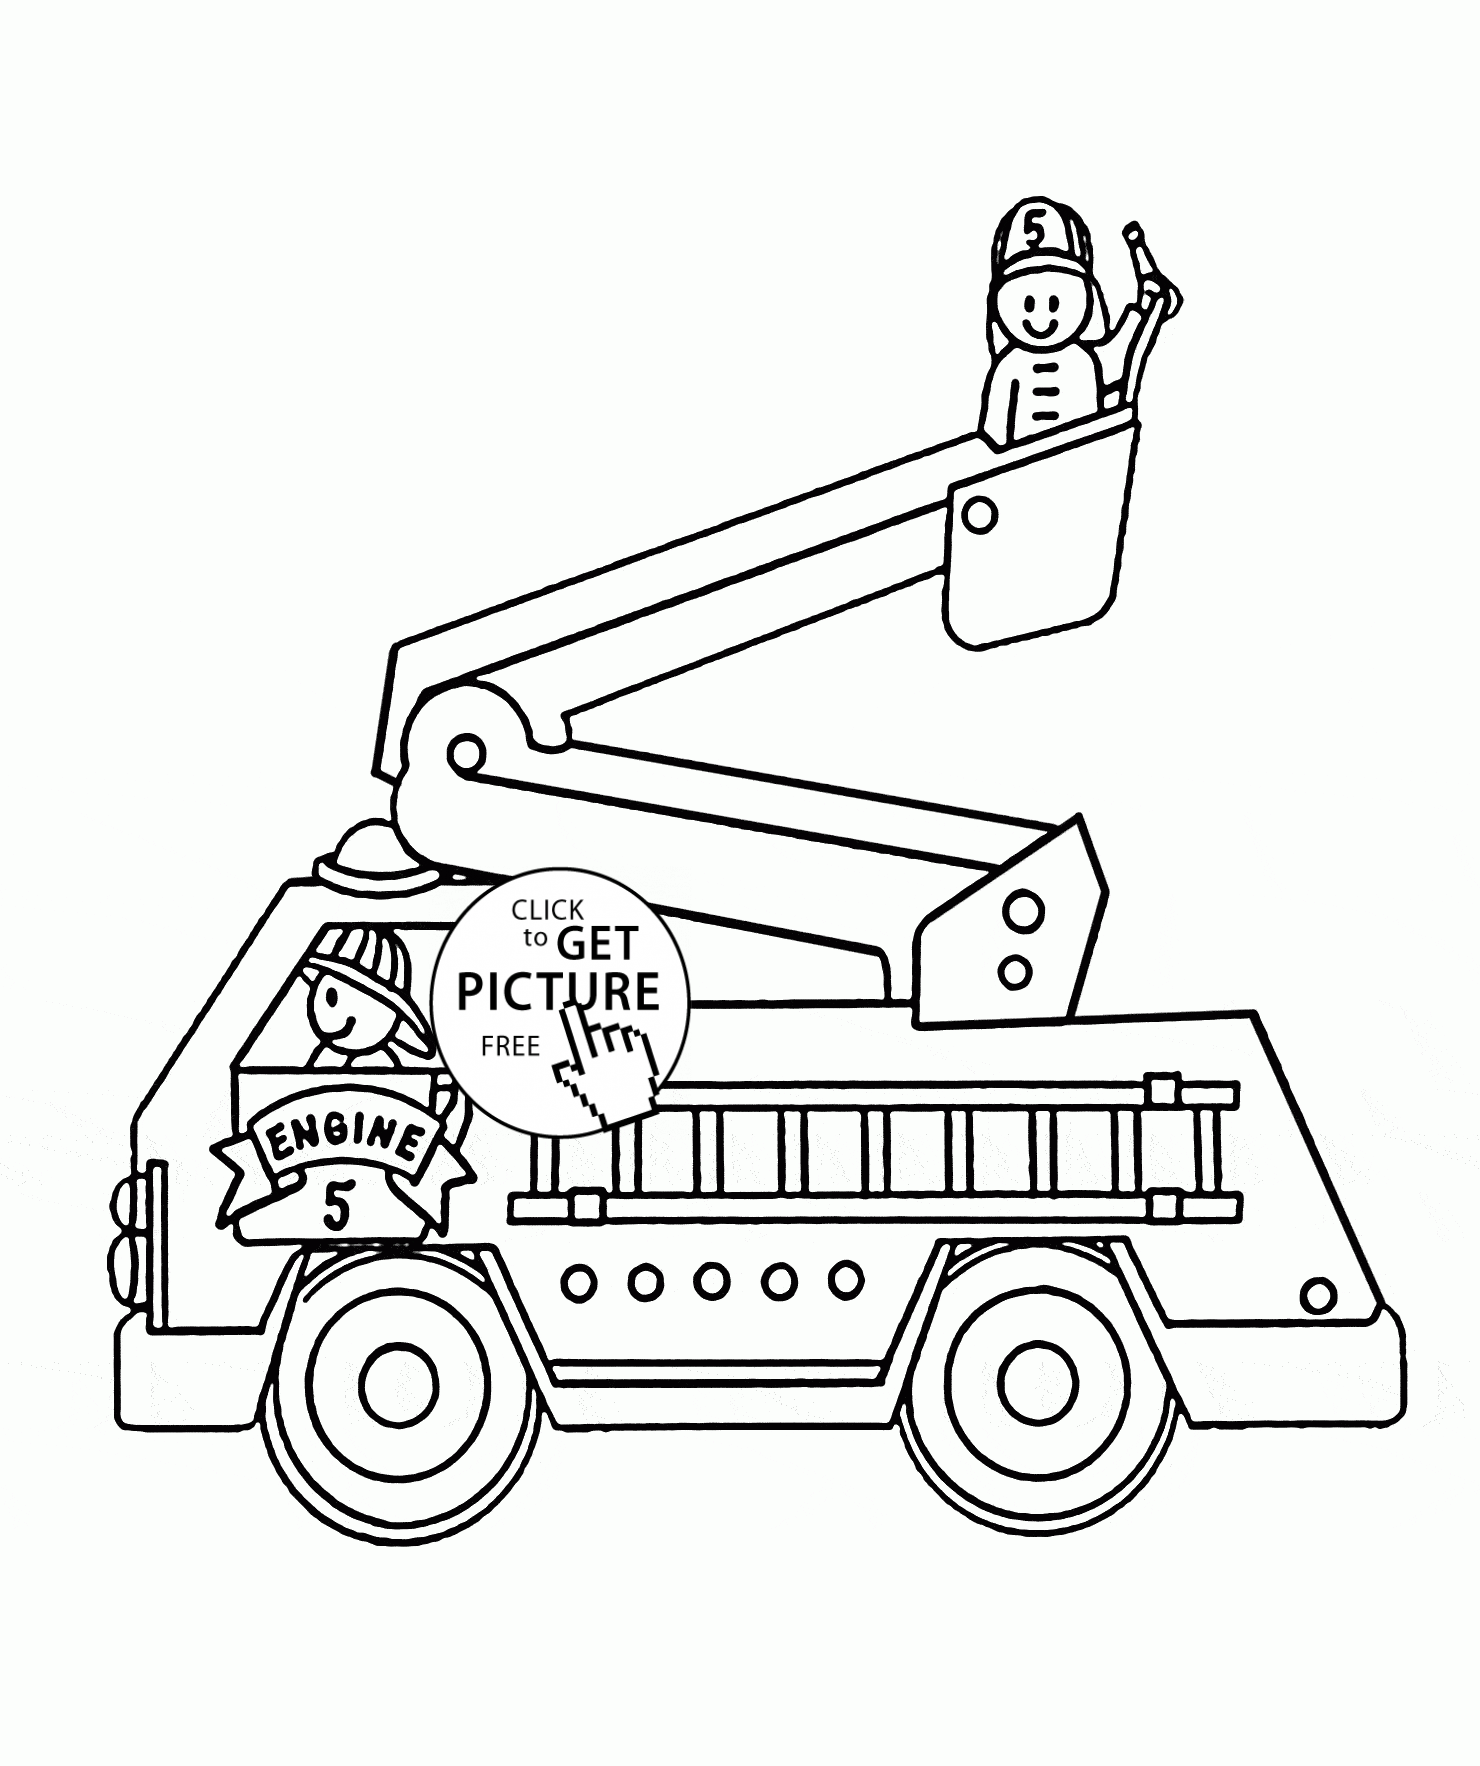 free fire truck coloring pages to print get this printable rainbow fish coloring sheets for kids pages coloring print free truck fire to 